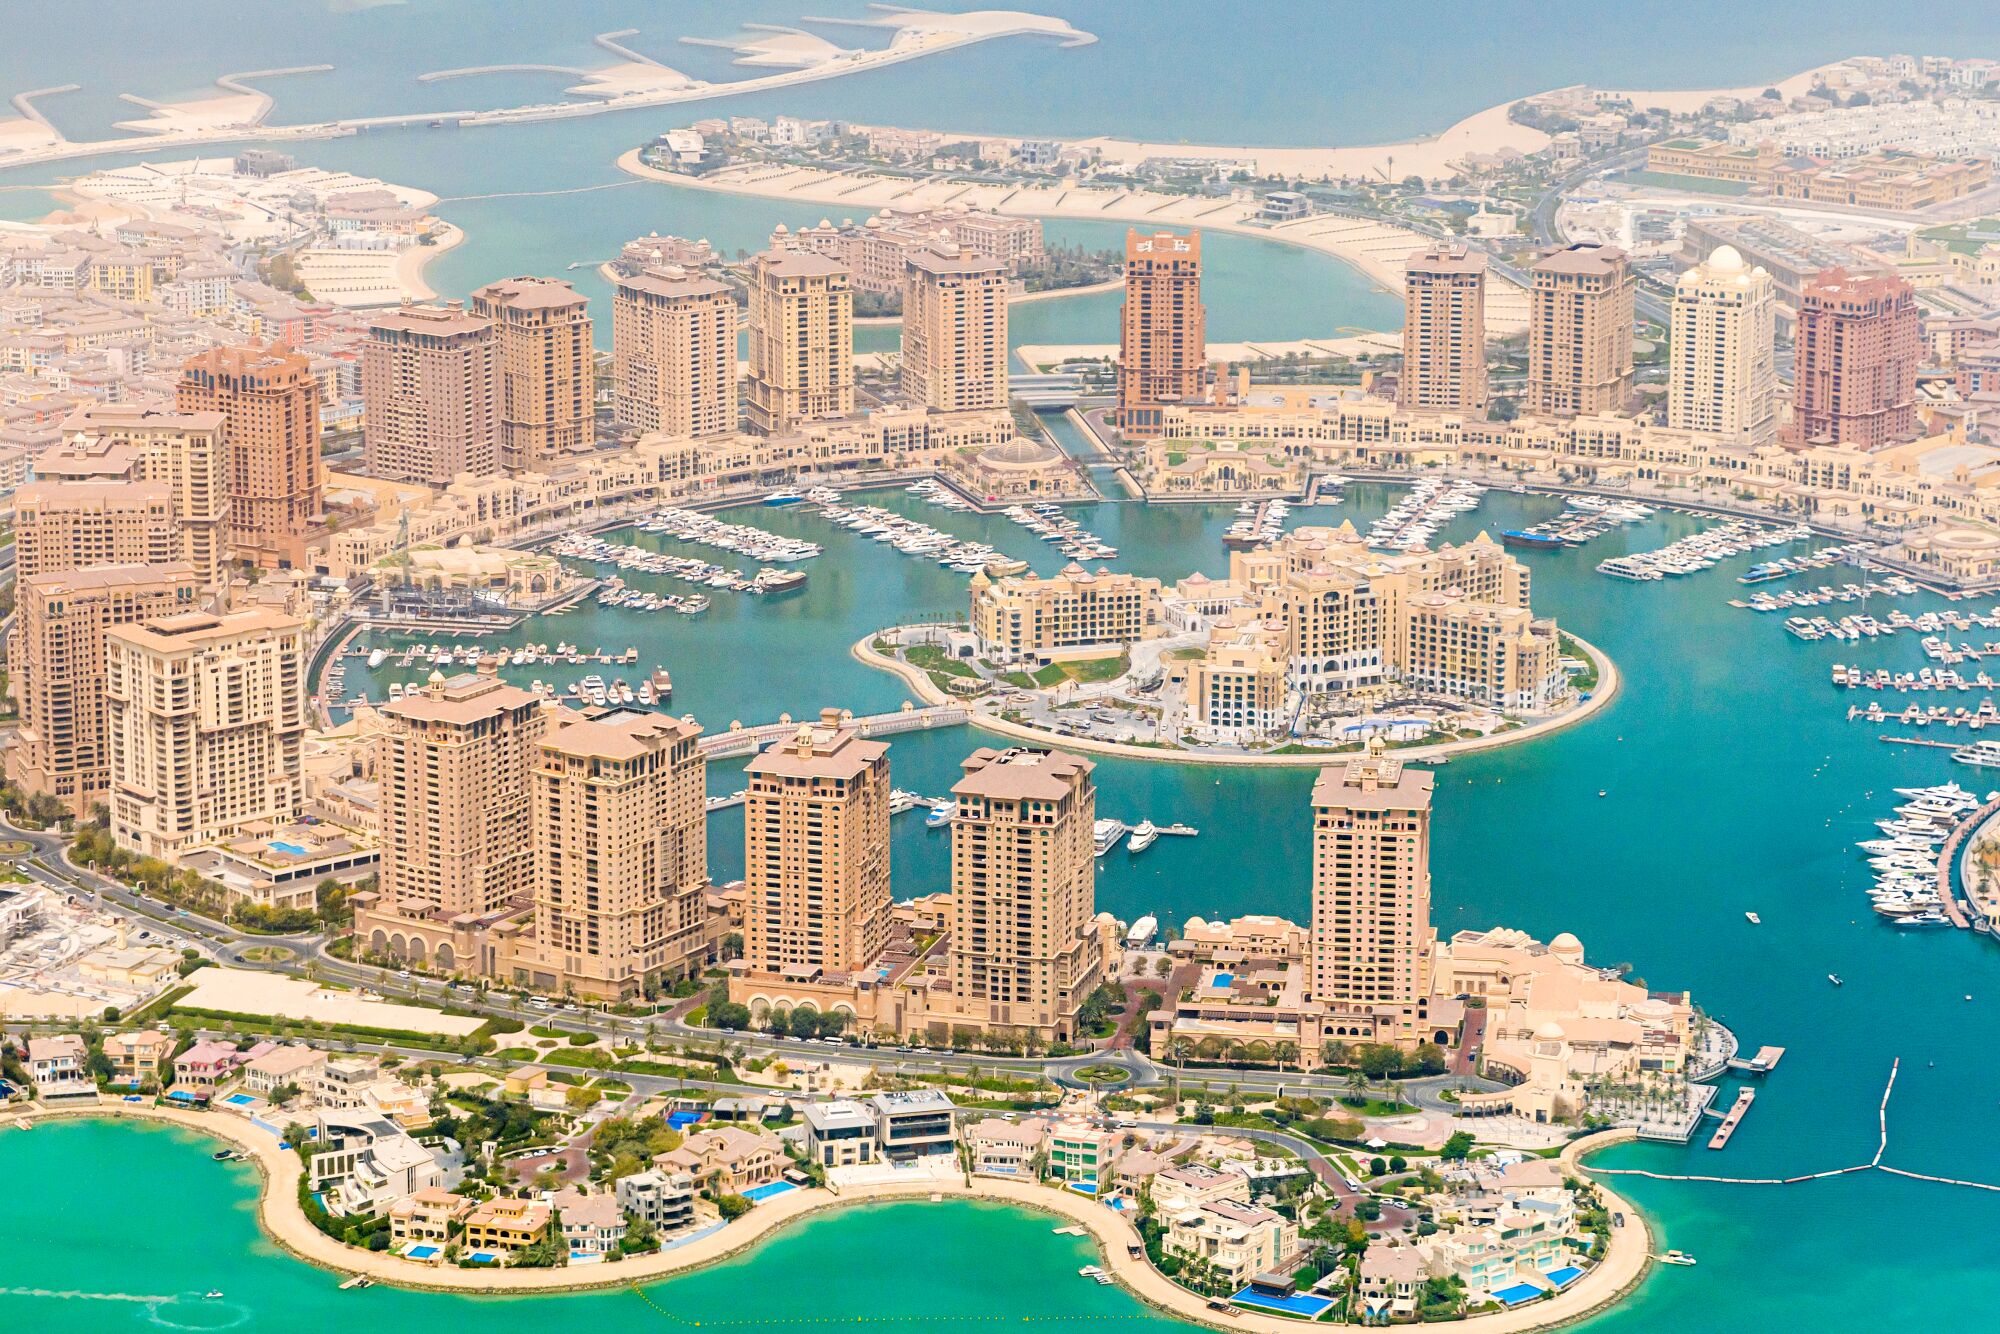 Aerial view of The Pearl, upscale residential area in Doha.